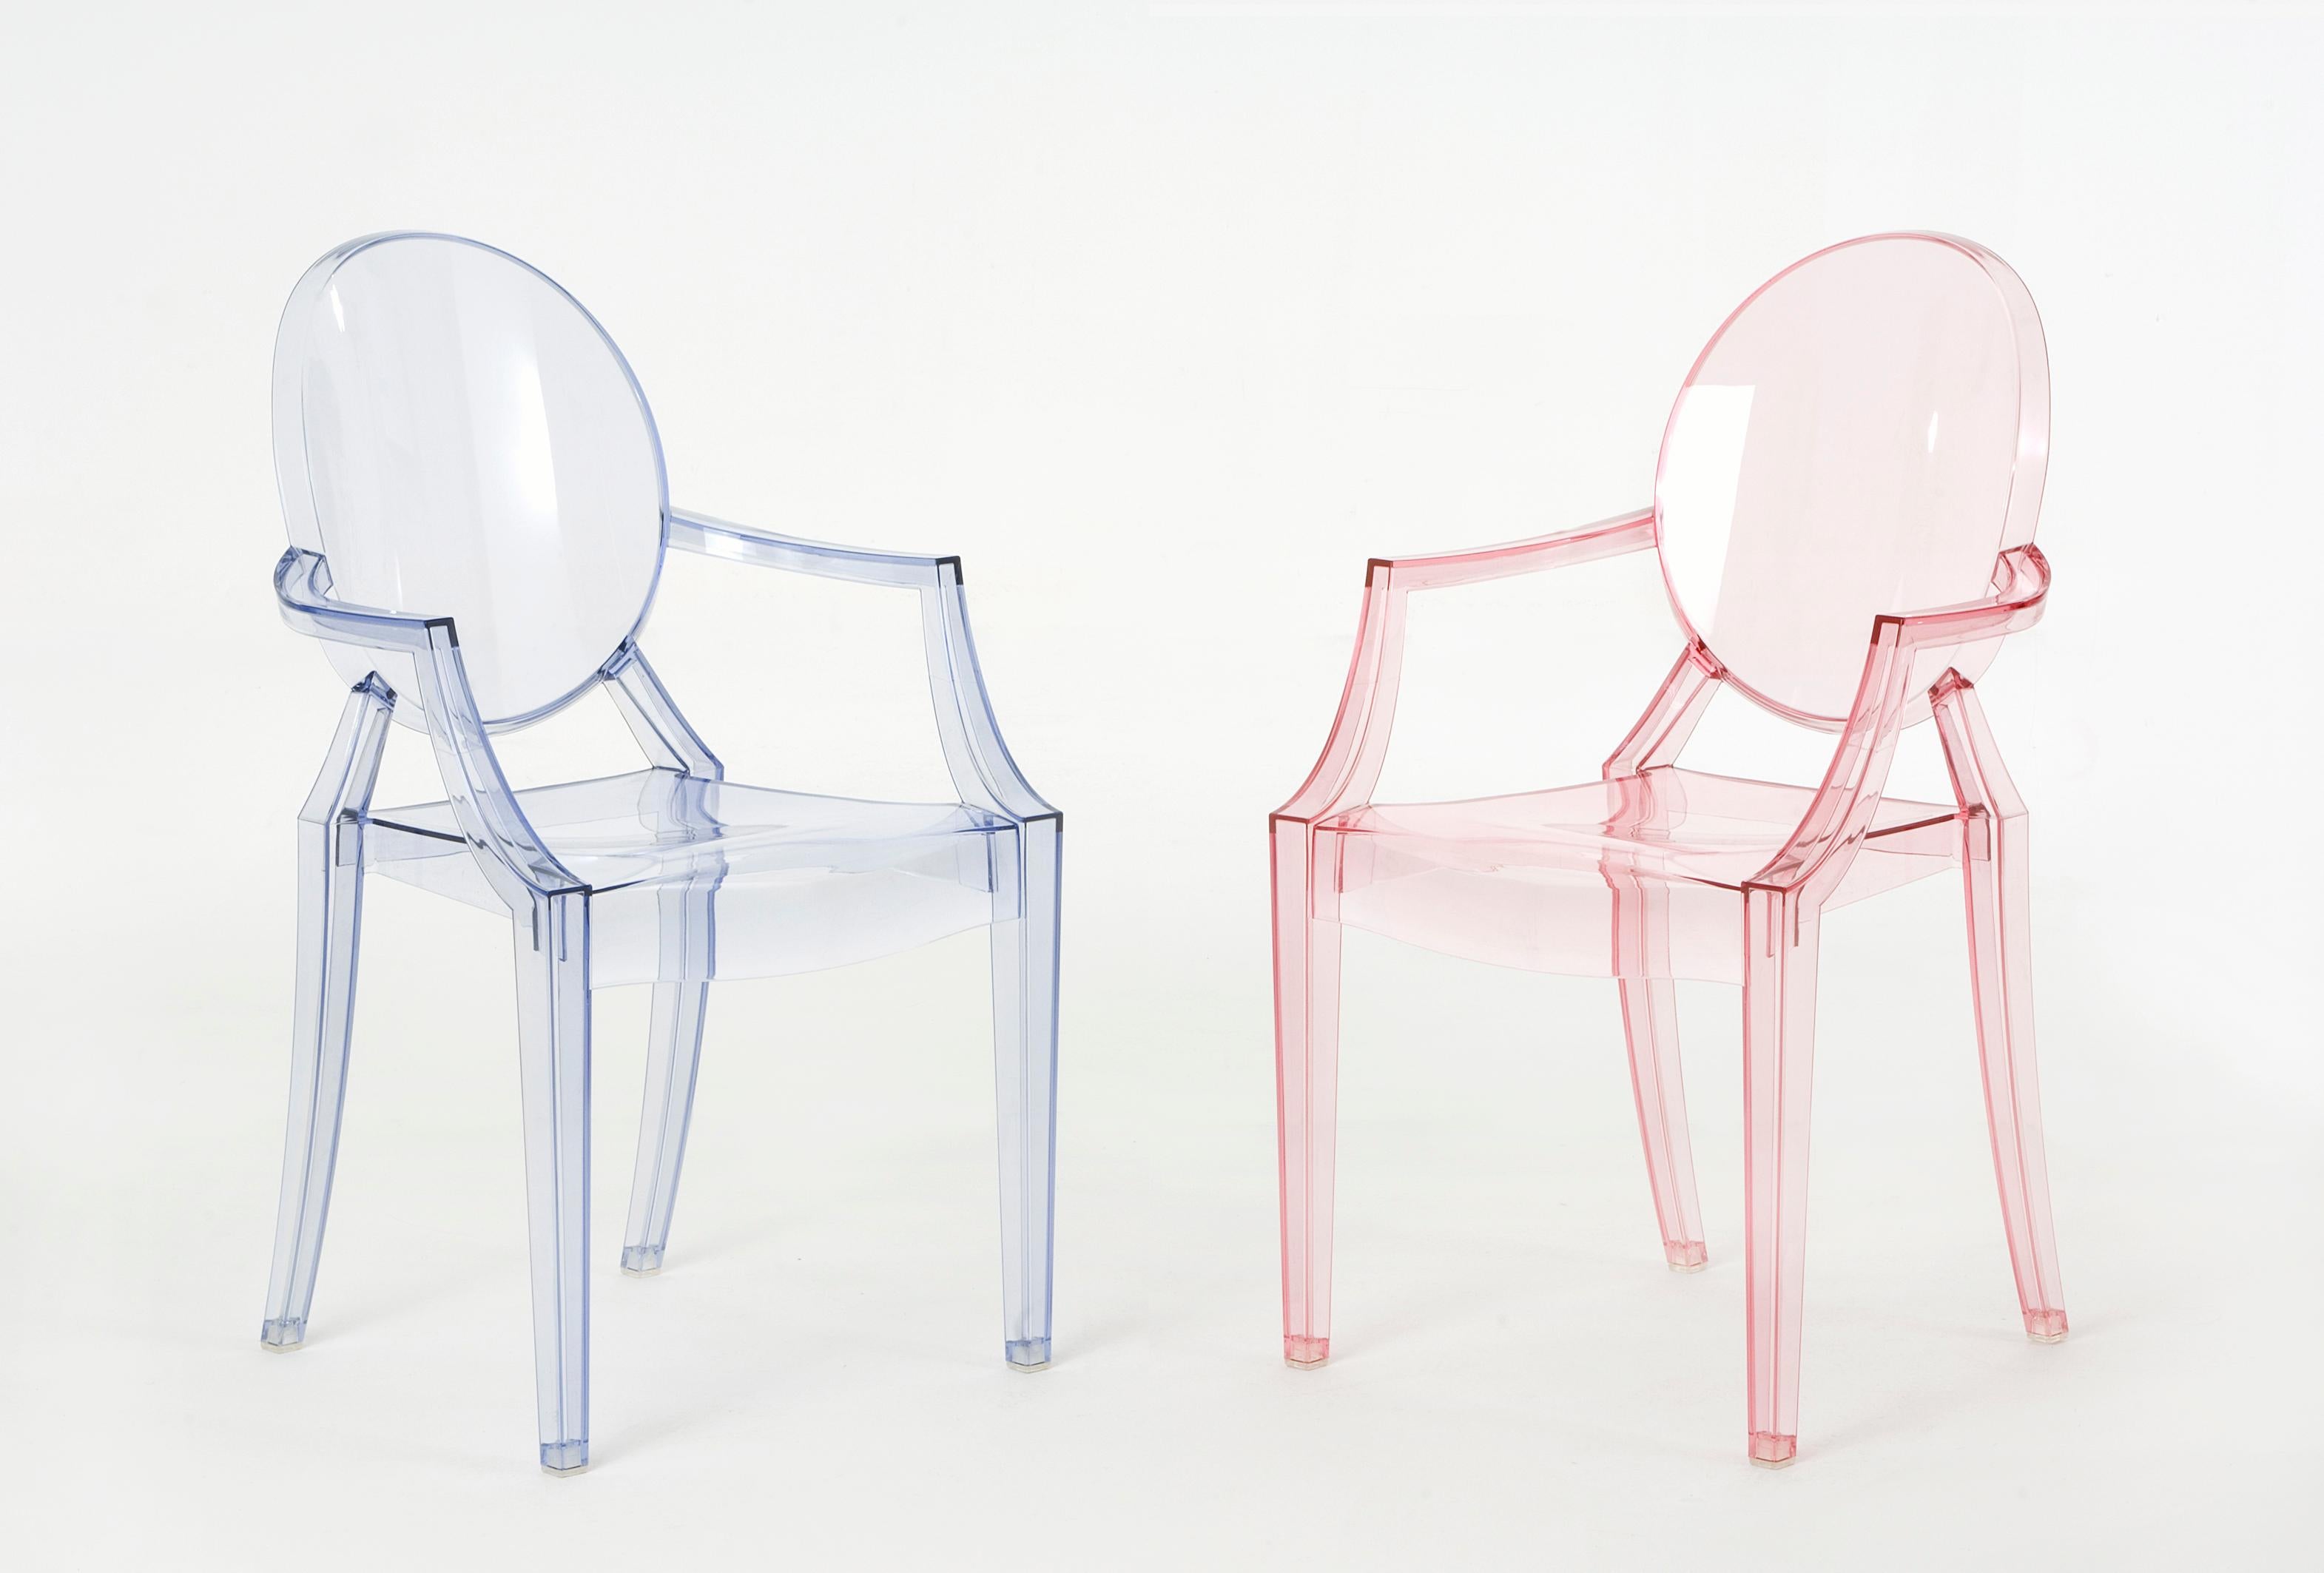 Following the runaway success of Louis Ghost, we’ve created a “baby” version of the famous Starck chair. Lou Lou Ghost inherits its “paternal” Classic lines, material, indestructibility and ergonomics and teaches little ones how to use a pint-sized